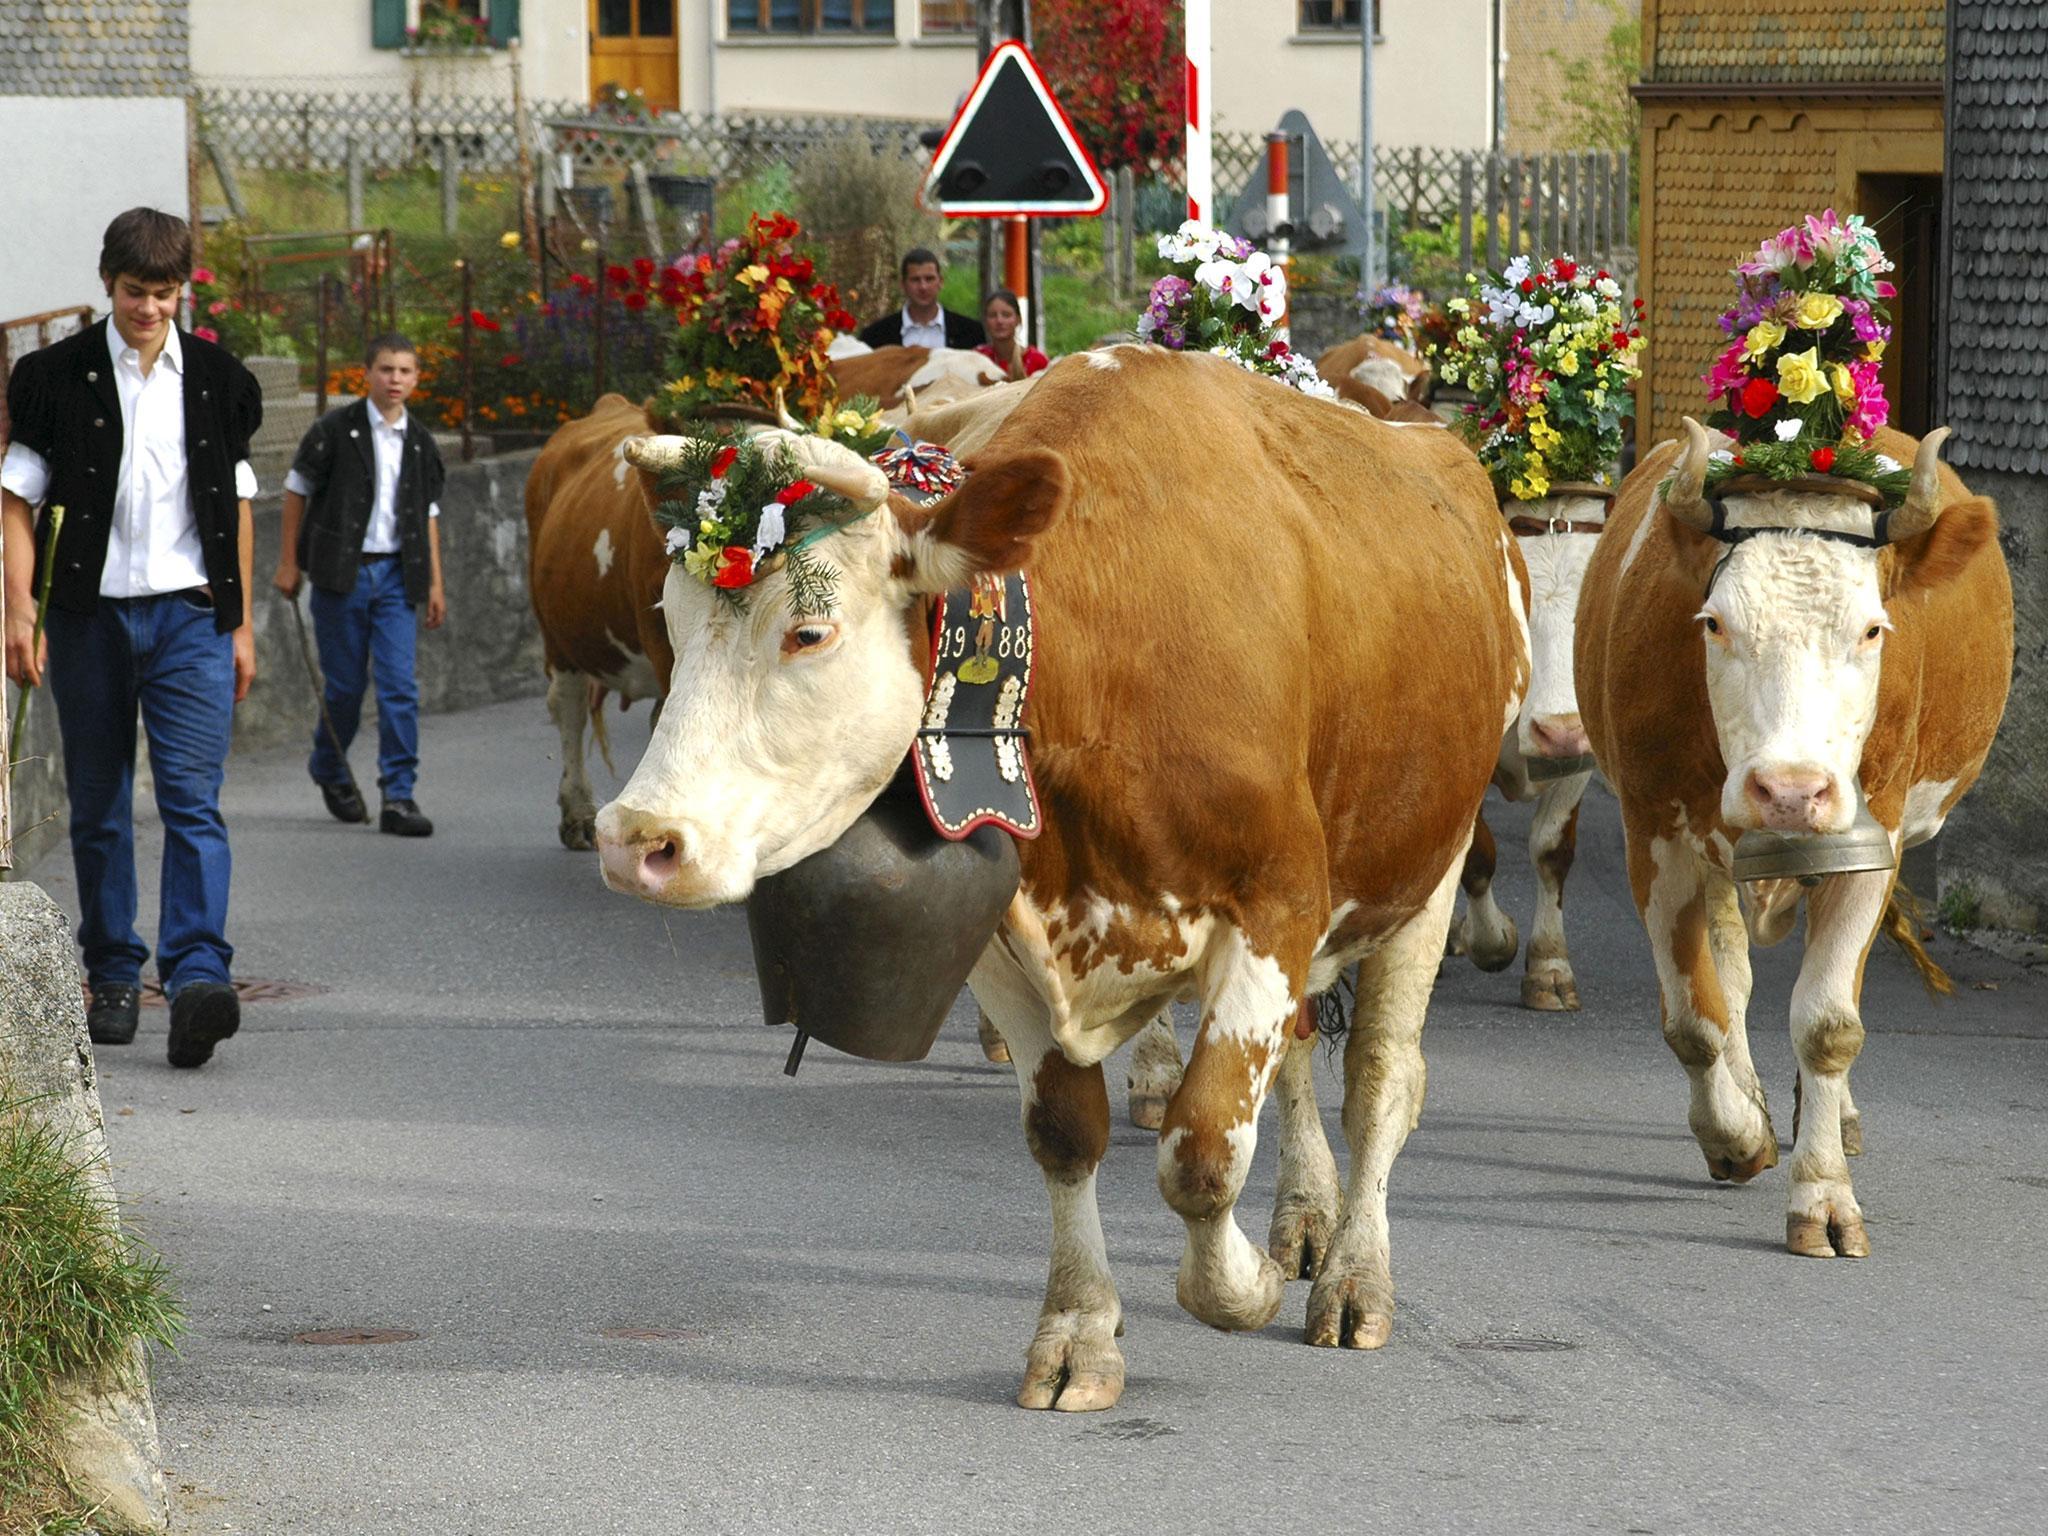 Ms Holten had objected to the tradition of cows wearing bells on animal rights grounds